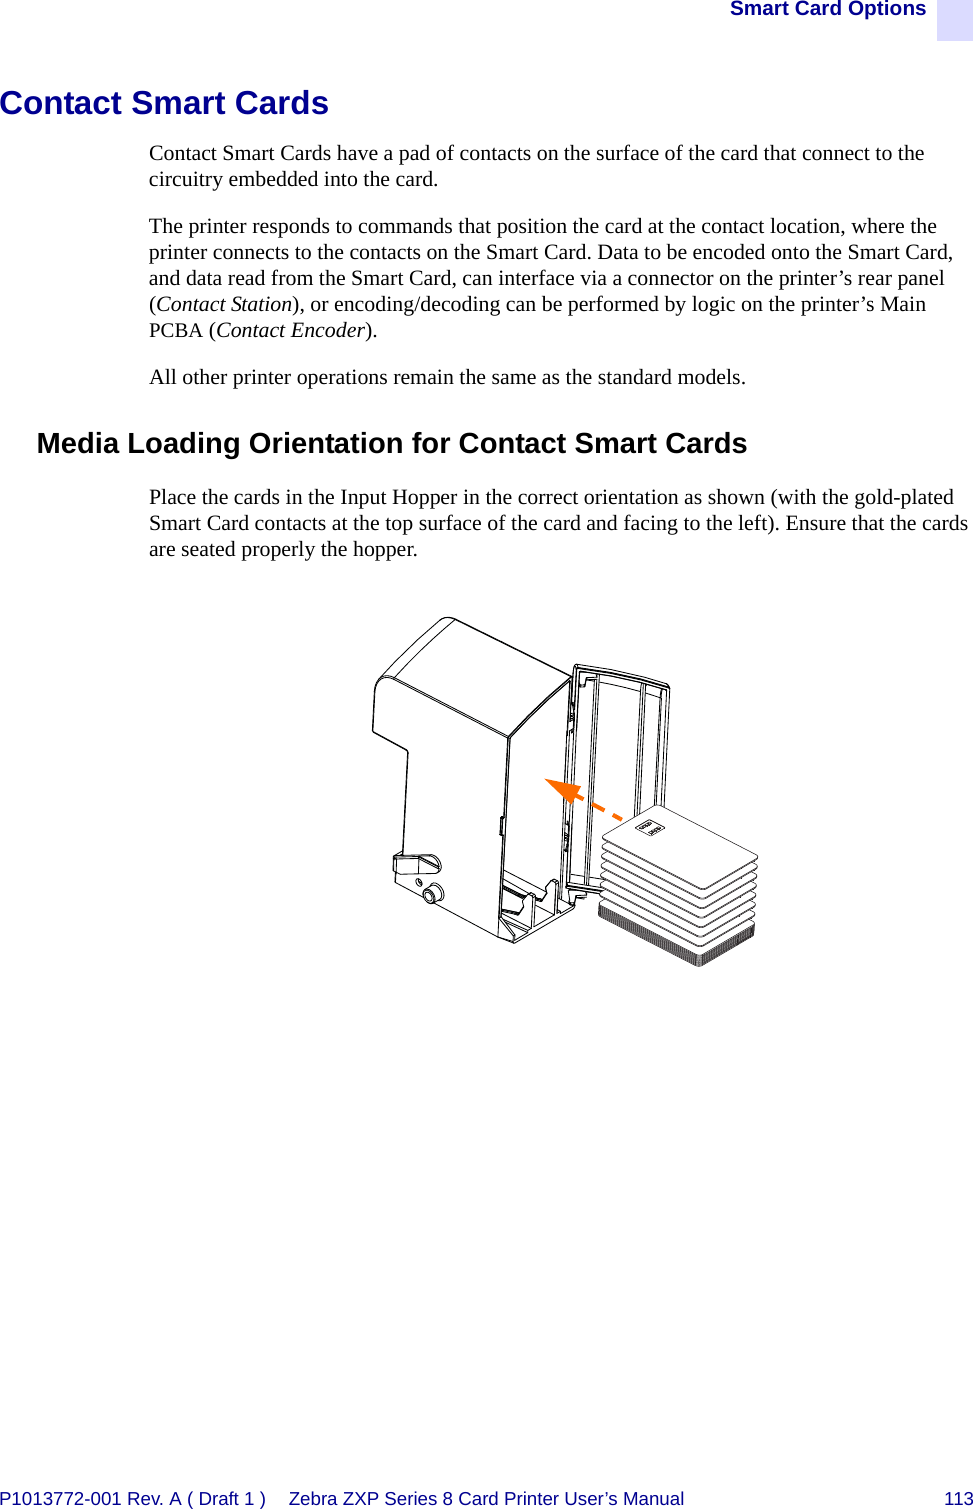 Smart Card OptionsP1013772-001 Rev. A ( Draft 1 ) Zebra ZXP Series 8 Card Printer User’s Manual 113Contact Smart CardsContact Smart Cards have a pad of contacts on the surface of the card that connect to the circuitry embedded into the card. The printer responds to commands that position the card at the contact location, where the printer connects to the contacts on the Smart Card. Data to be encoded onto the Smart Card, and data read from the Smart Card, can interface via a connector on the printer’s rear panel (Contact Station), or encoding/decoding can be performed by logic on the printer’s Main PCBA (Contact Encoder). All other printer operations remain the same as the standard models.Media Loading Orientation for Contact Smart CardsPlace the cards in the Input Hopper in the correct orientation as shown (with the gold-plated Smart Card contacts at the top surface of the card and facing to the left). Ensure that the cards are seated properly the hopper.